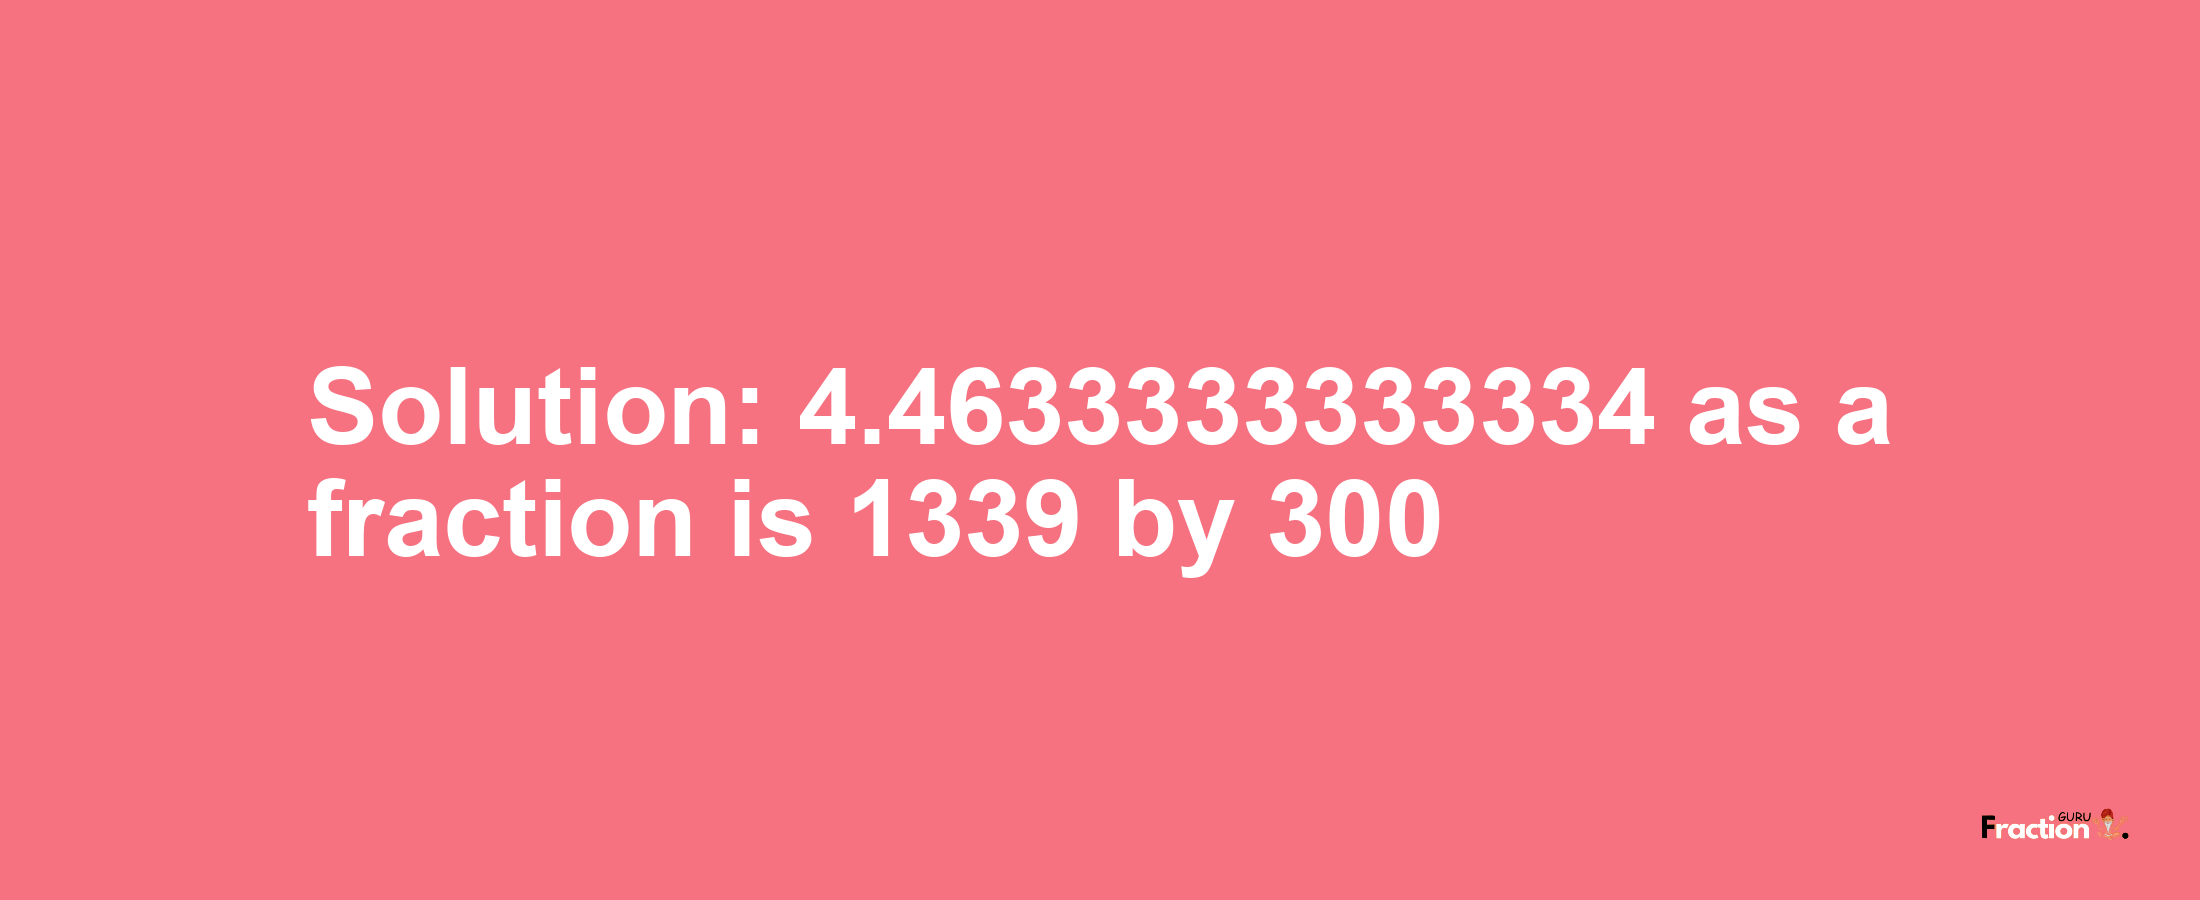 Solution:4.4633333333334 as a fraction is 1339/300